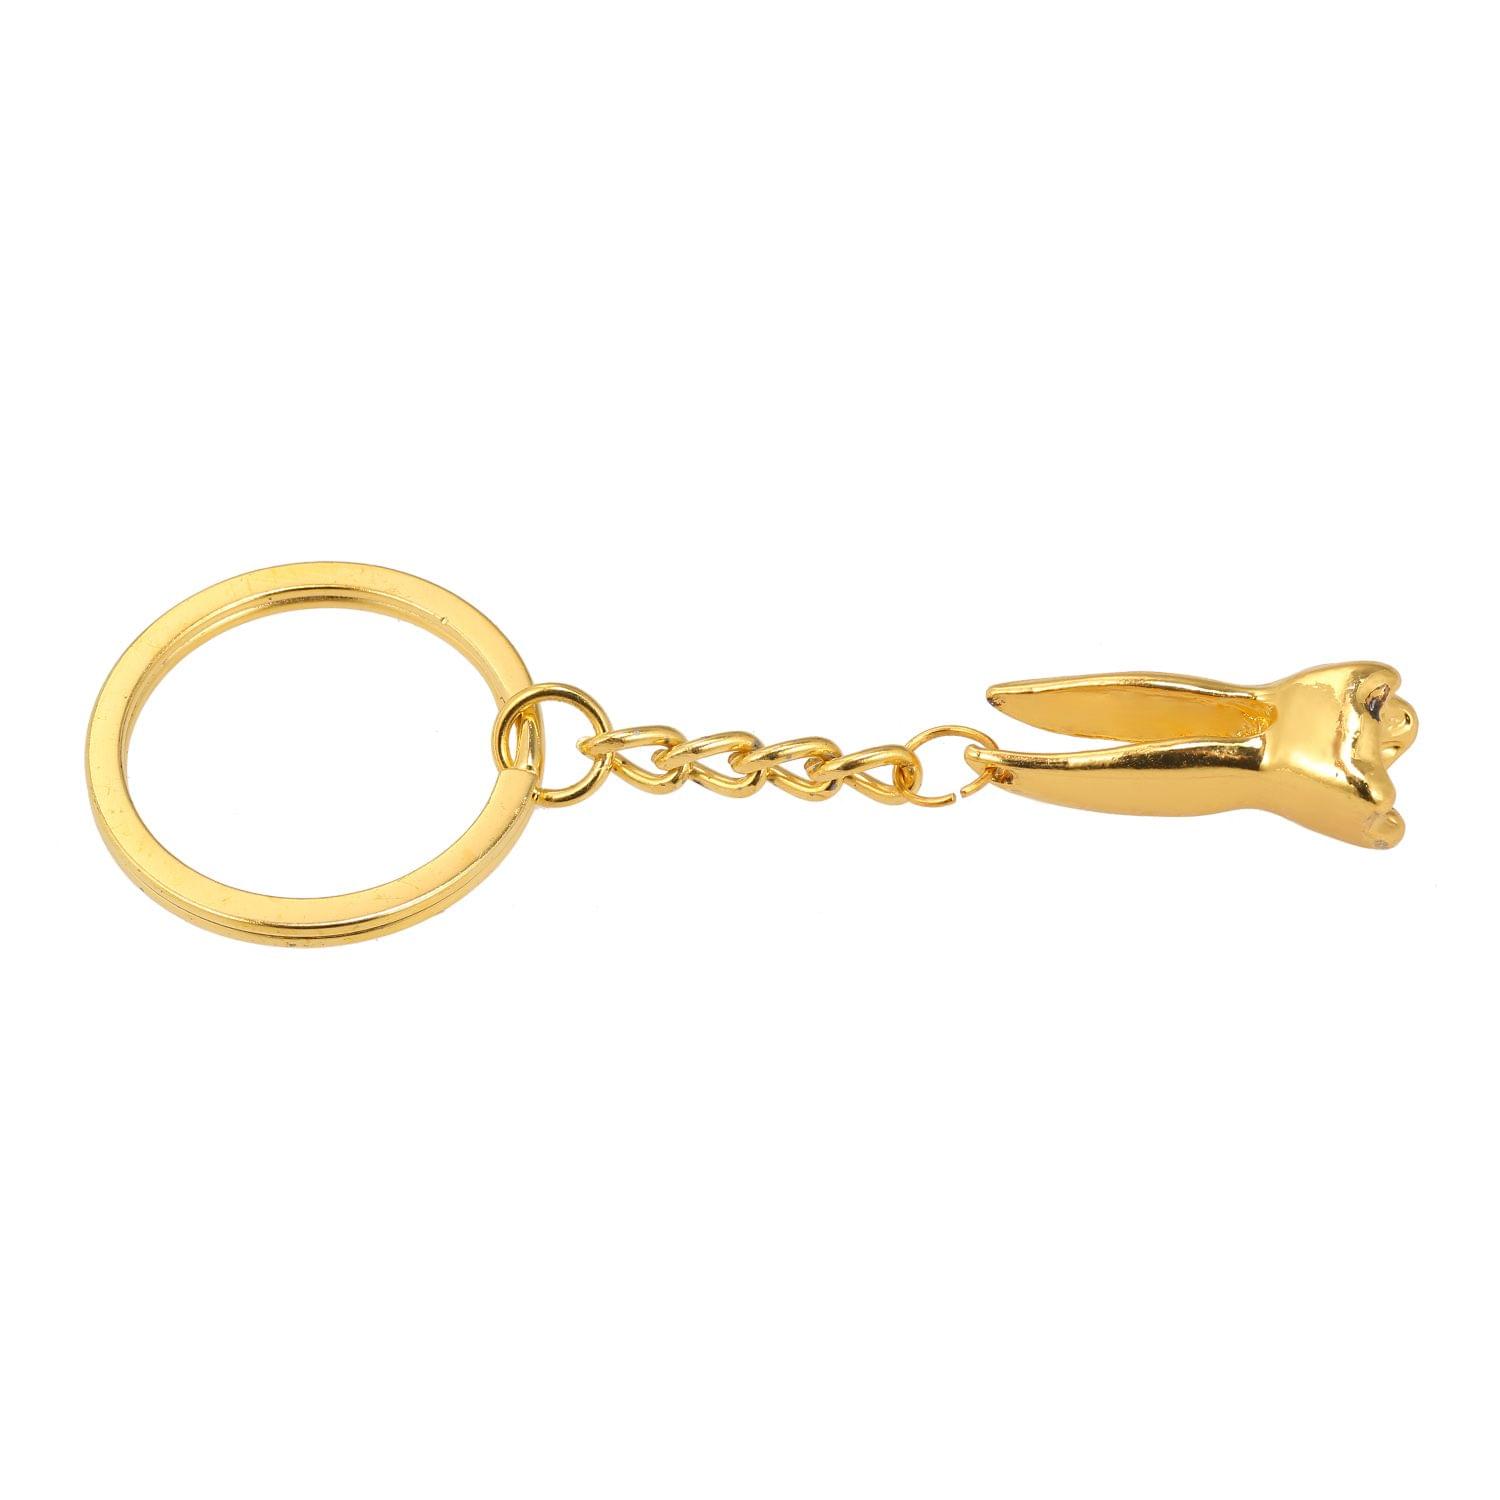 Gold Tooth-shaped Key Chain Dental Theme Stainless Steel Key